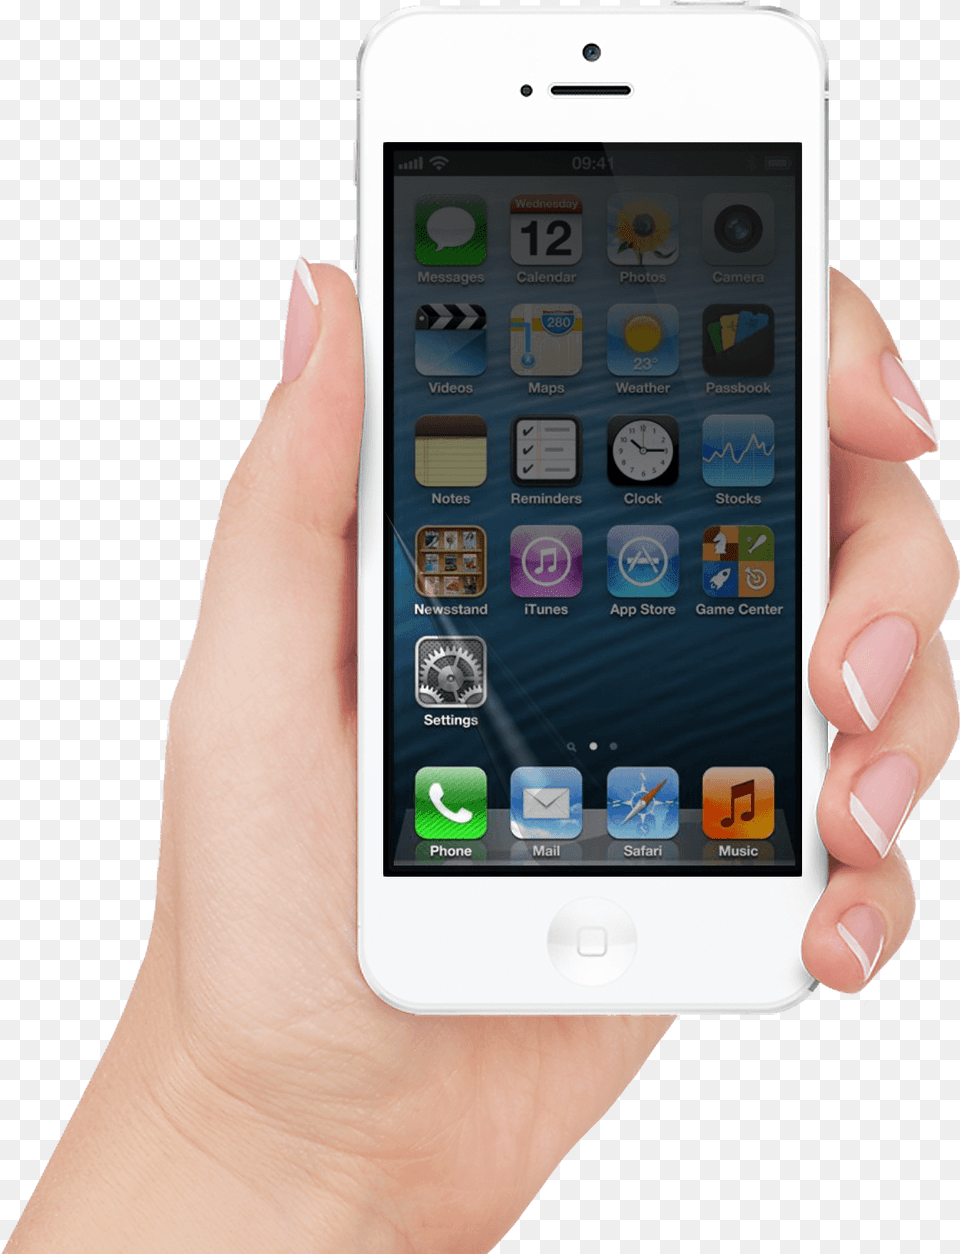 Phone In Hand Image Black Iphone 5s Price, Electronics, Mobile Phone Free Png Download